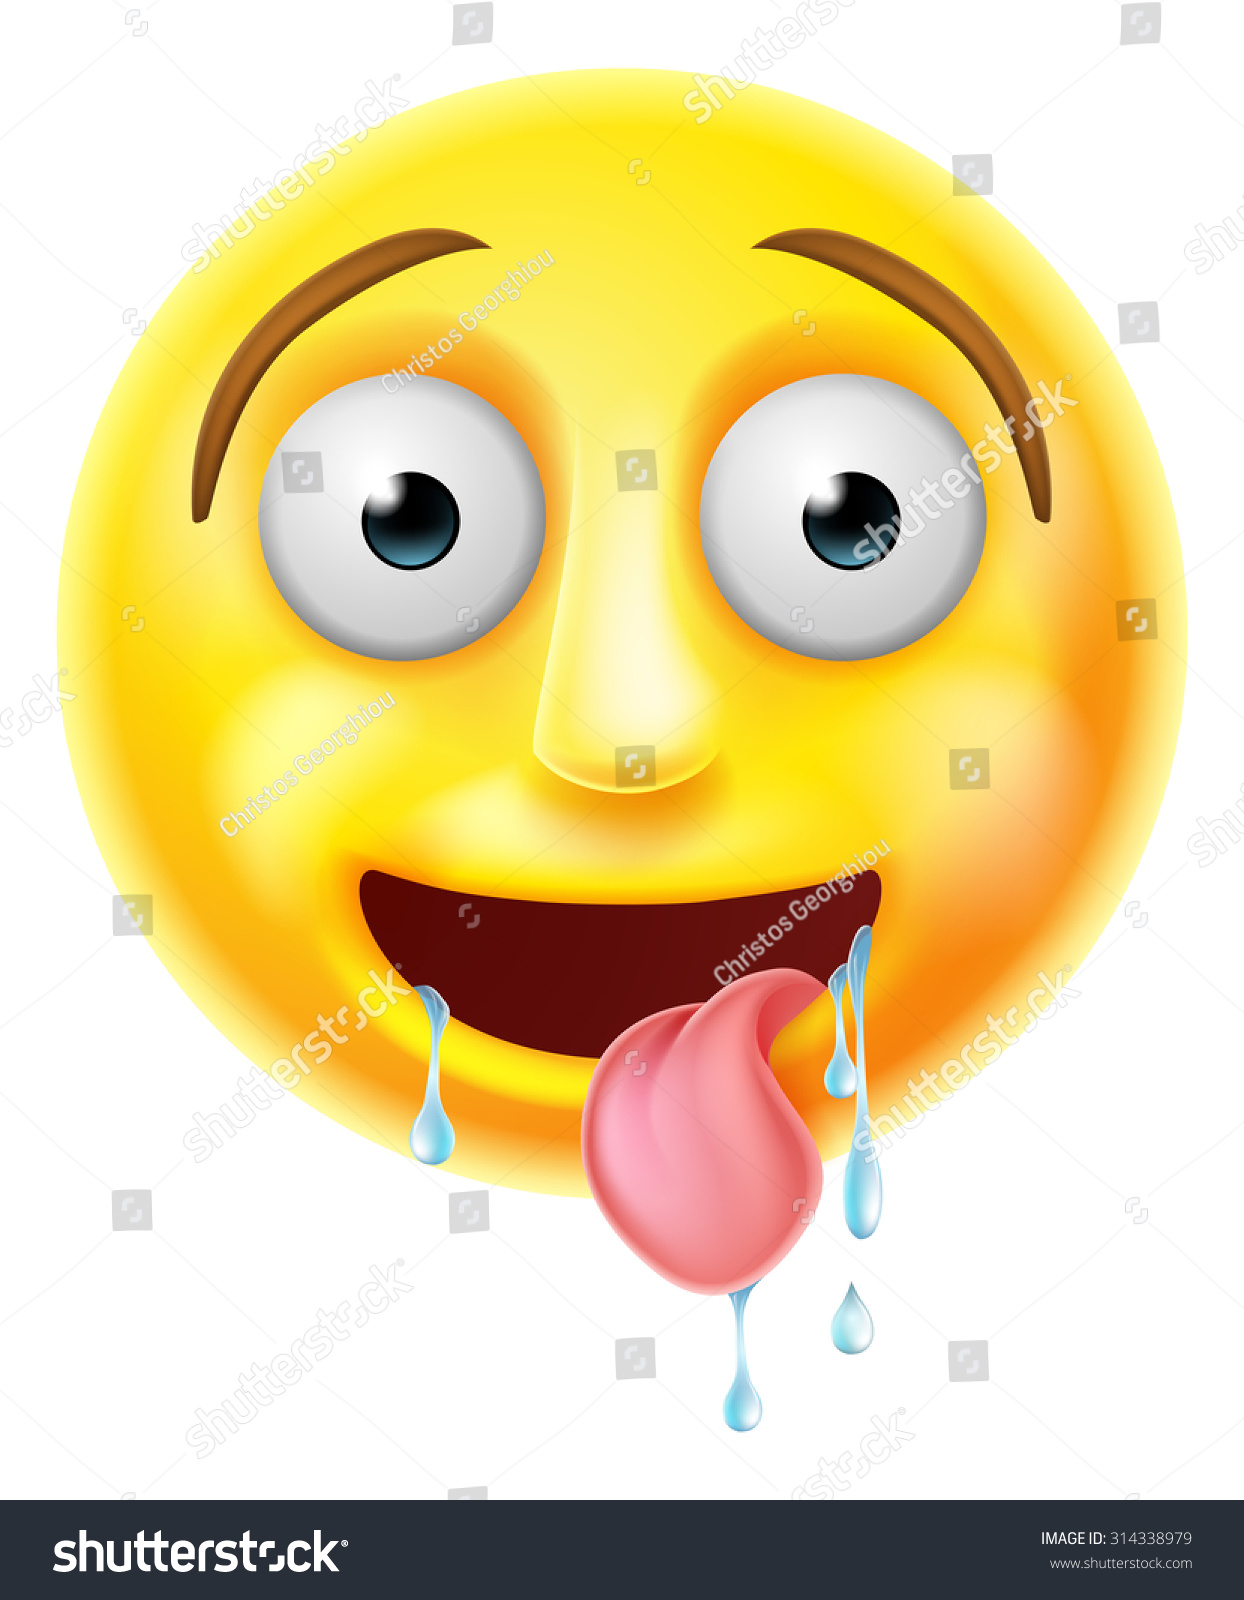 stock-vector-a-cartoon-emoji-emoticon-drooling-with-his-tongue-hanging-out-314338979.jpg